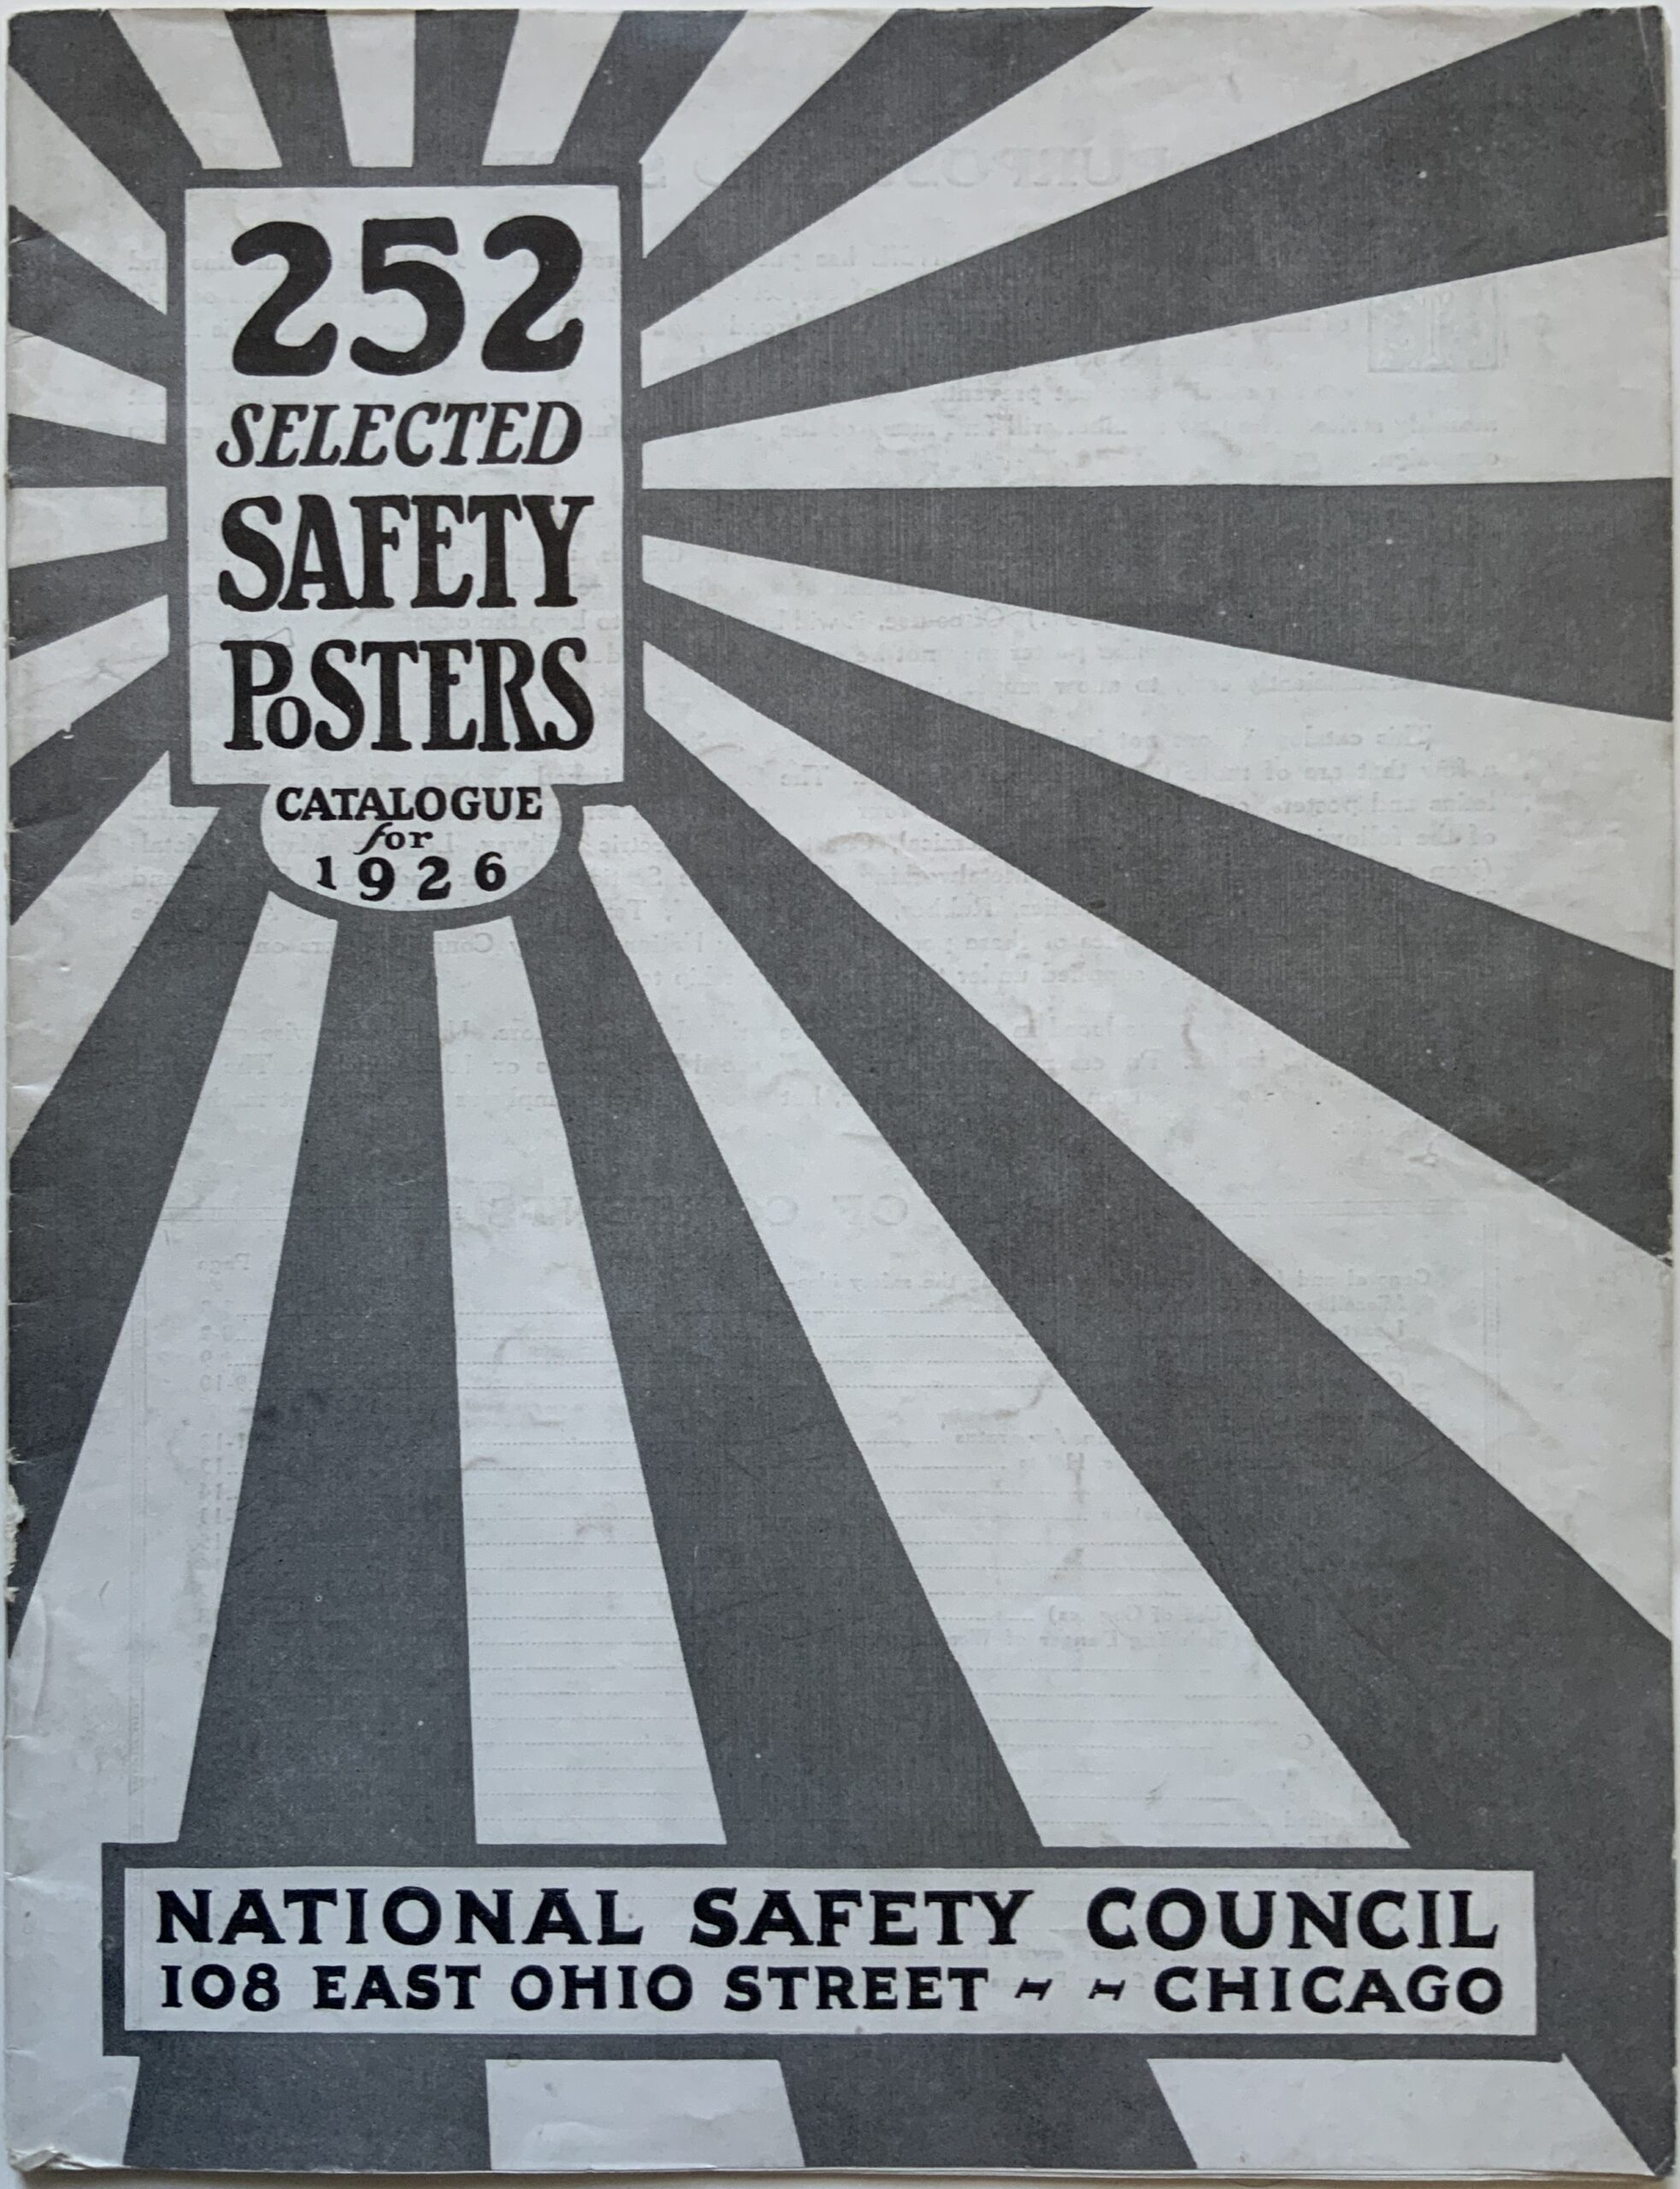 M297	252 SELECTED SAFETY POSTERS